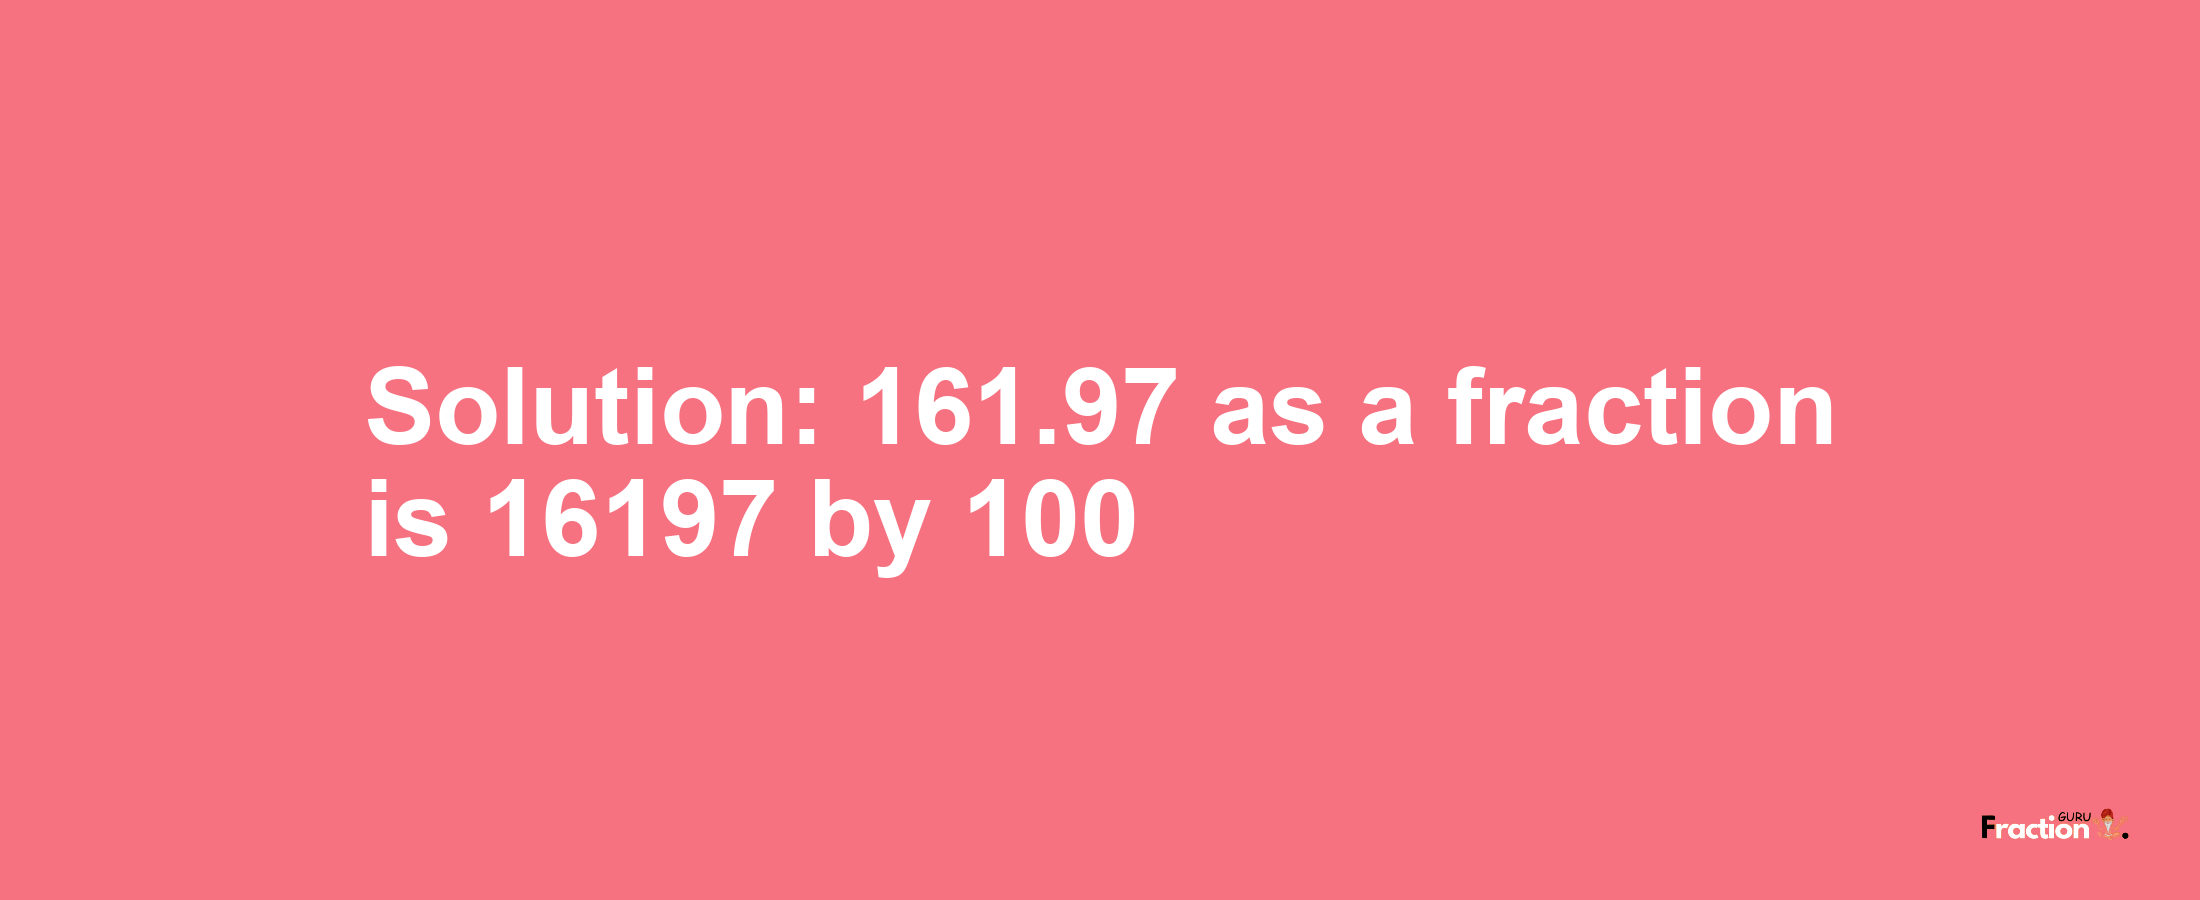 Solution:161.97 as a fraction is 16197/100